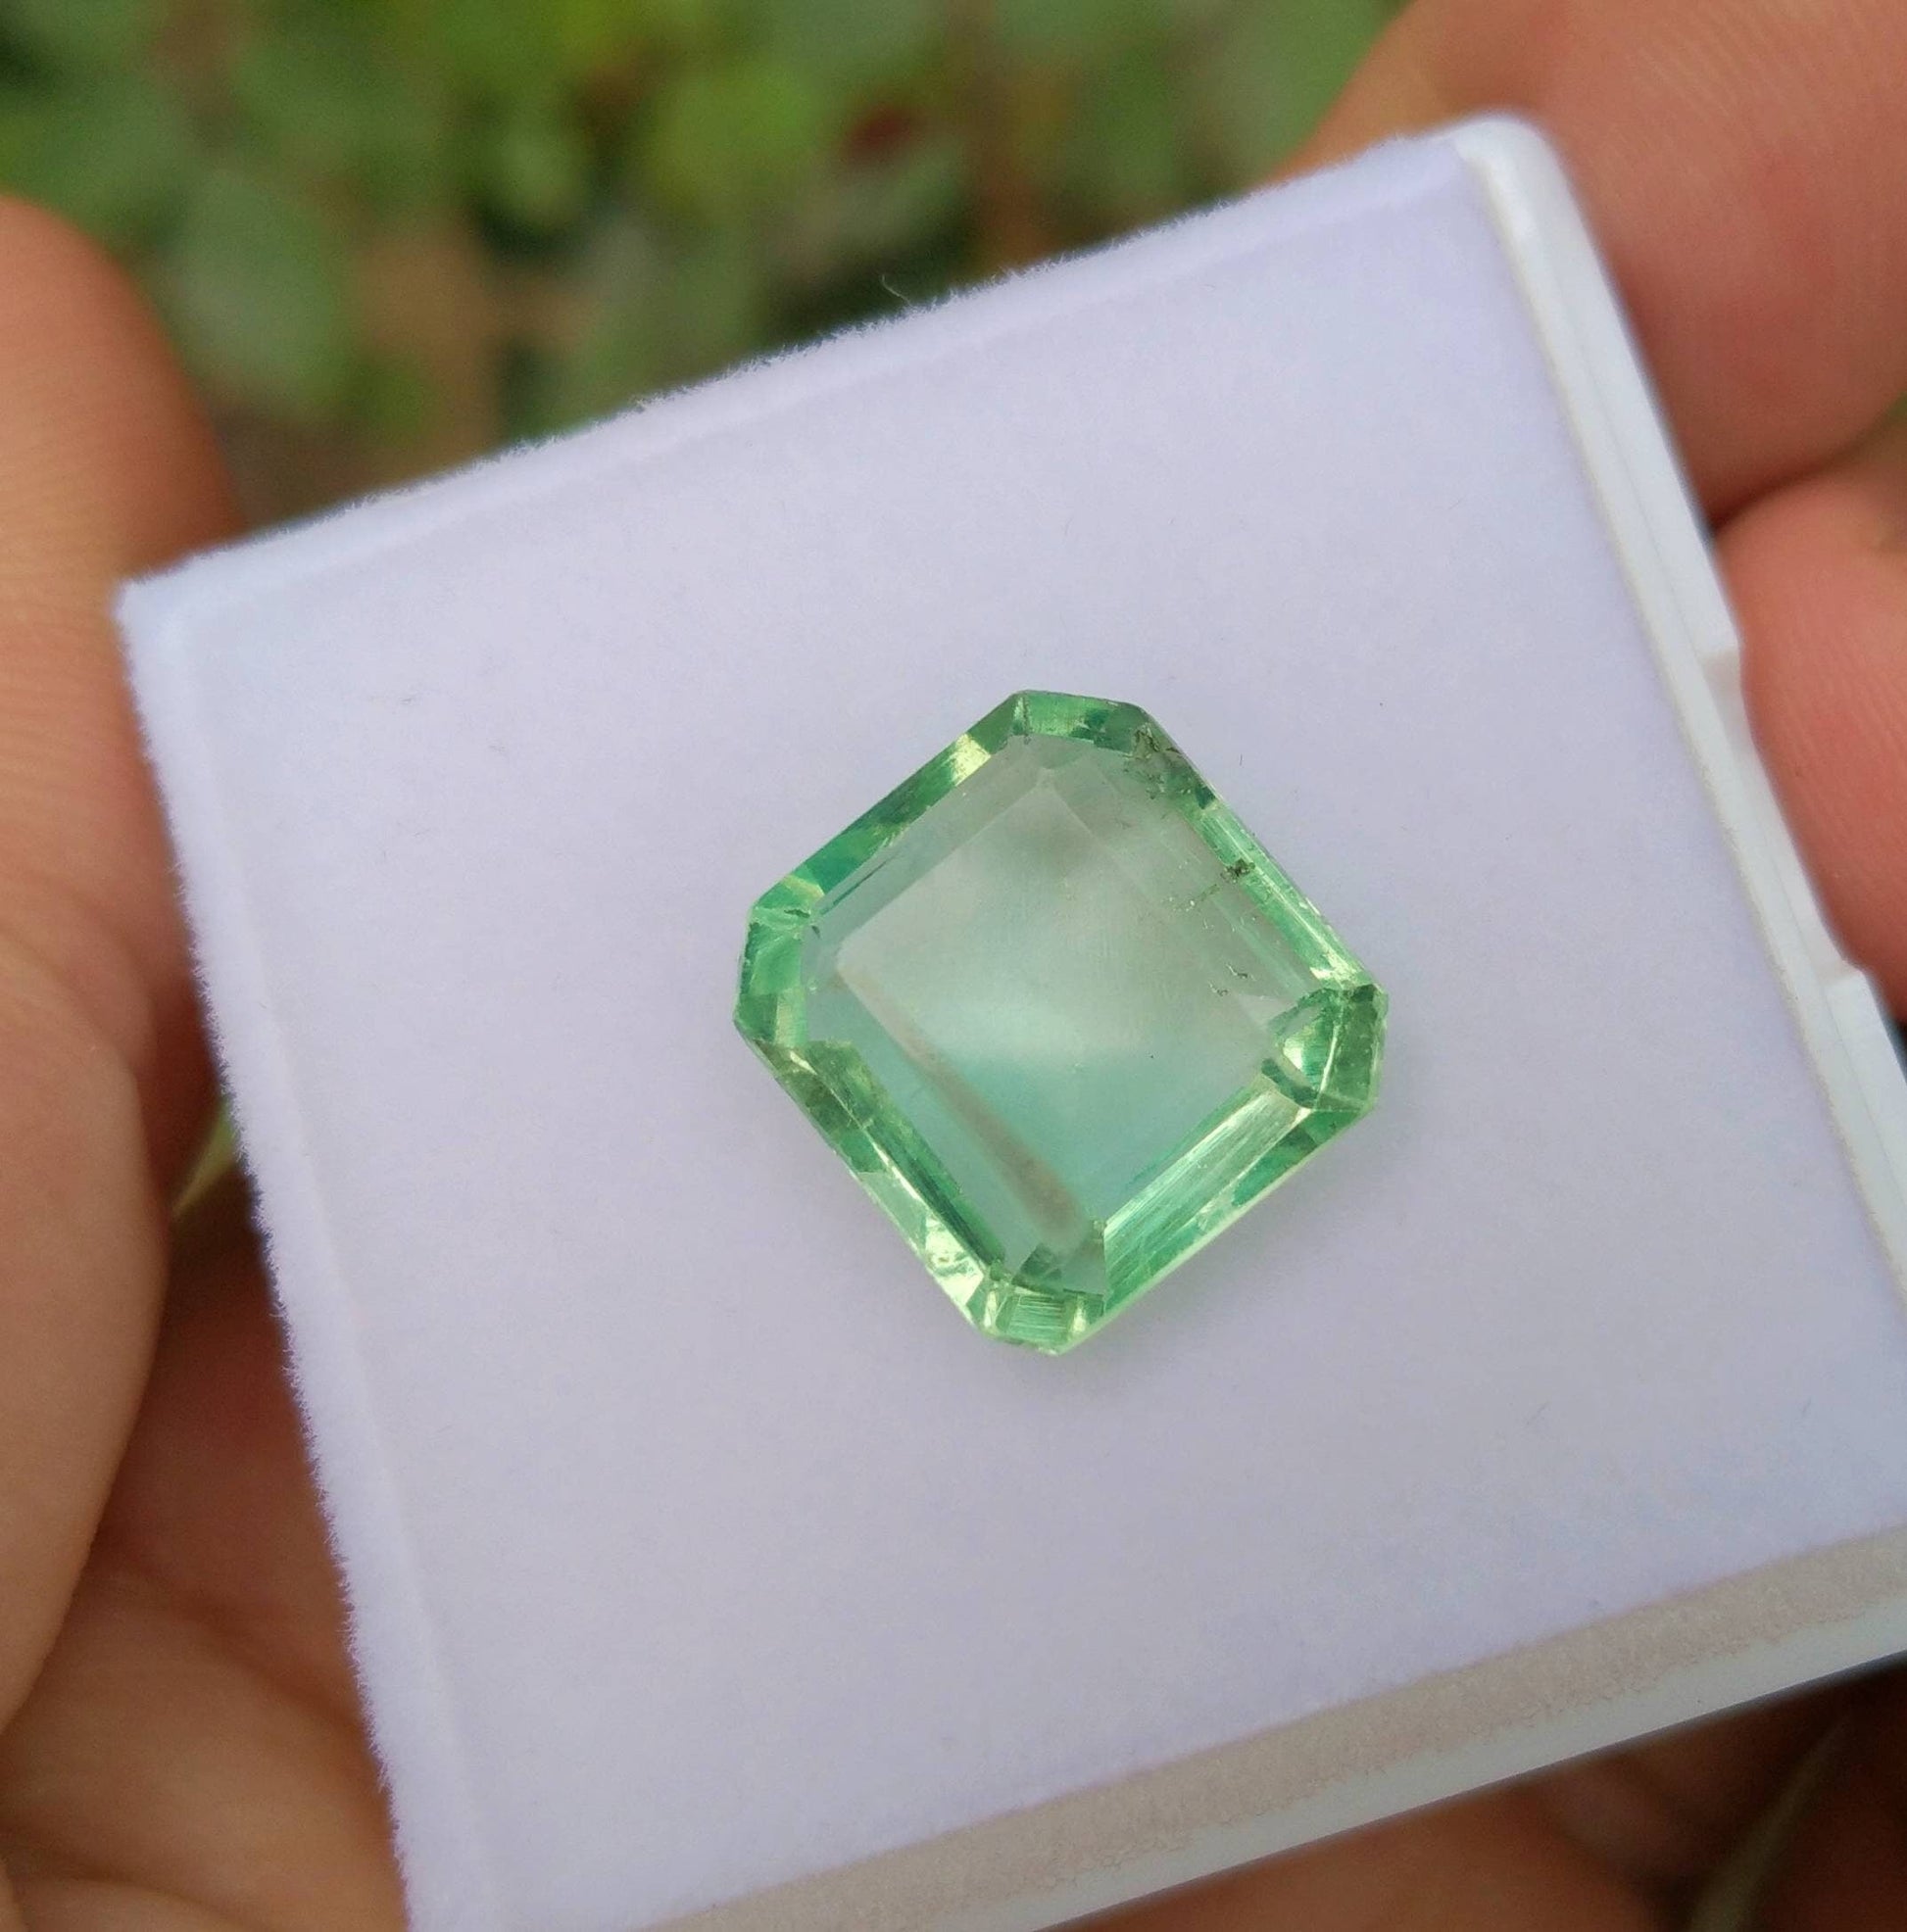 ARSAA GEMS AND MINERALSNatural top quality beautiful 9.5 carats VV clarity faceted radiant shape green fluorite gem - Premium  from ARSAA GEMS AND MINERALS - Just $20.00! Shop now at ARSAA GEMS AND MINERALS